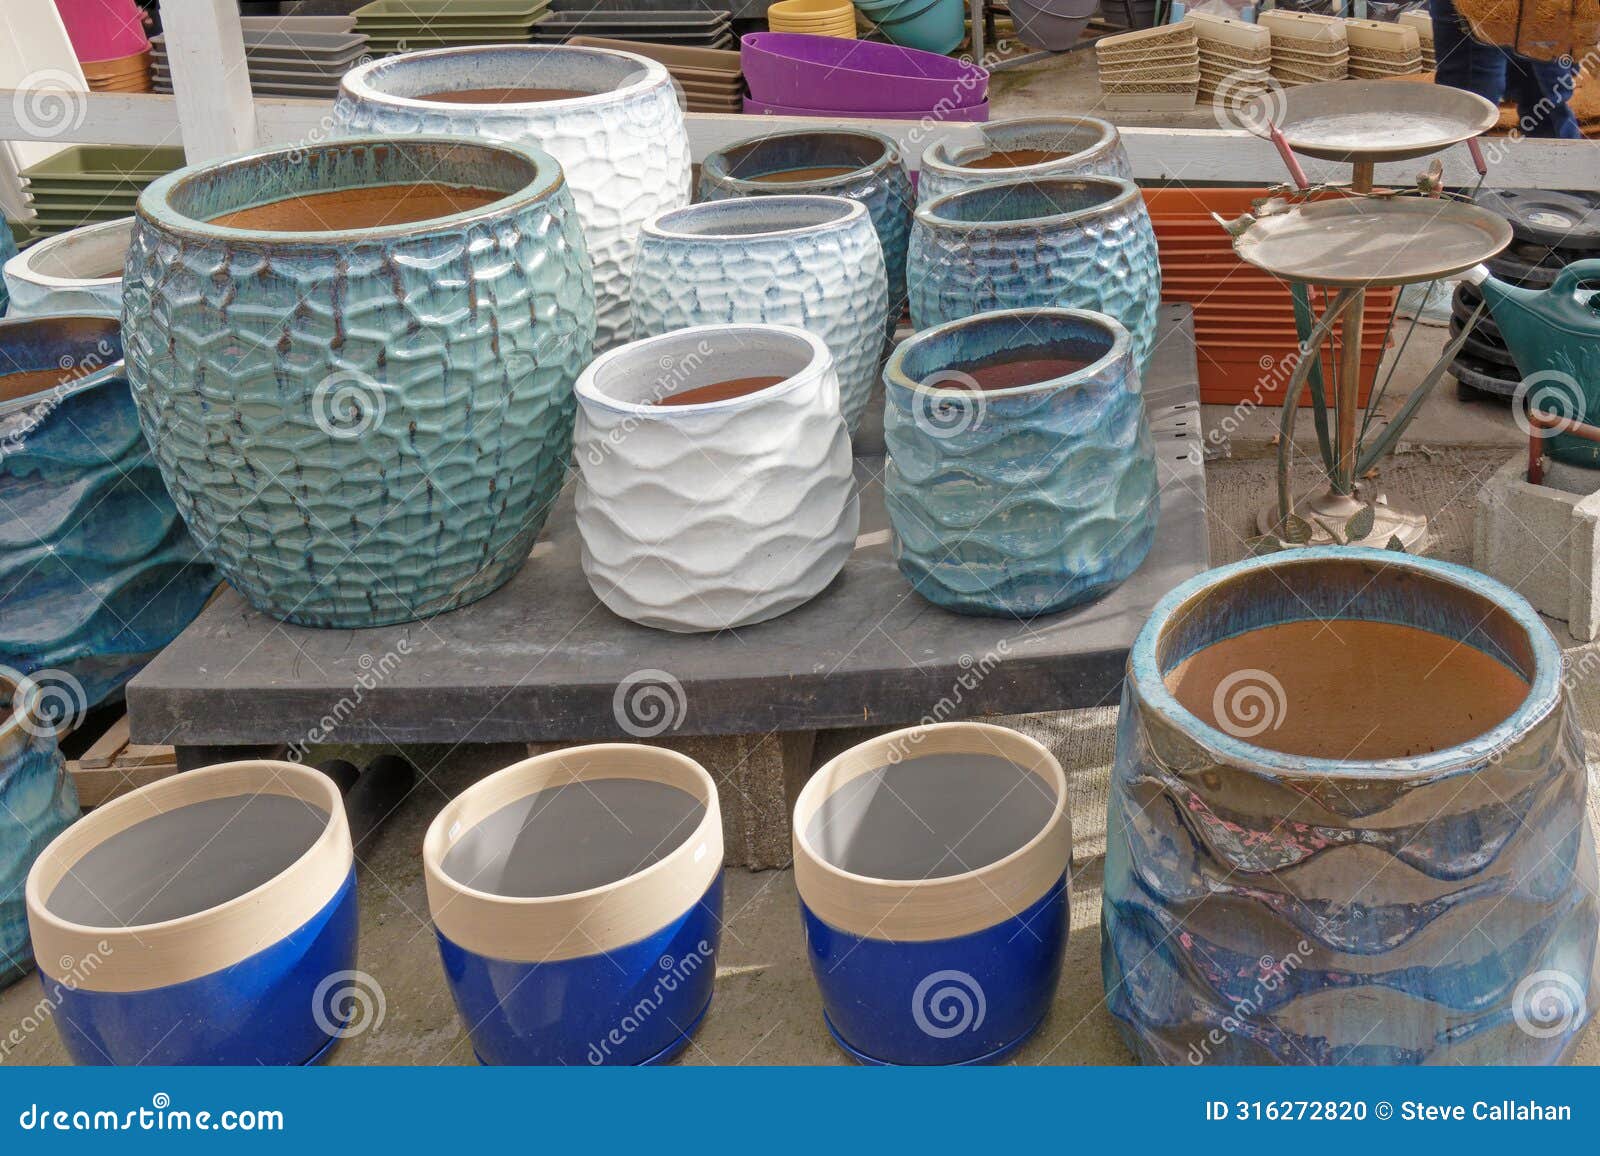 sizes and colors of large clay and porcelain flower pots for spring planting